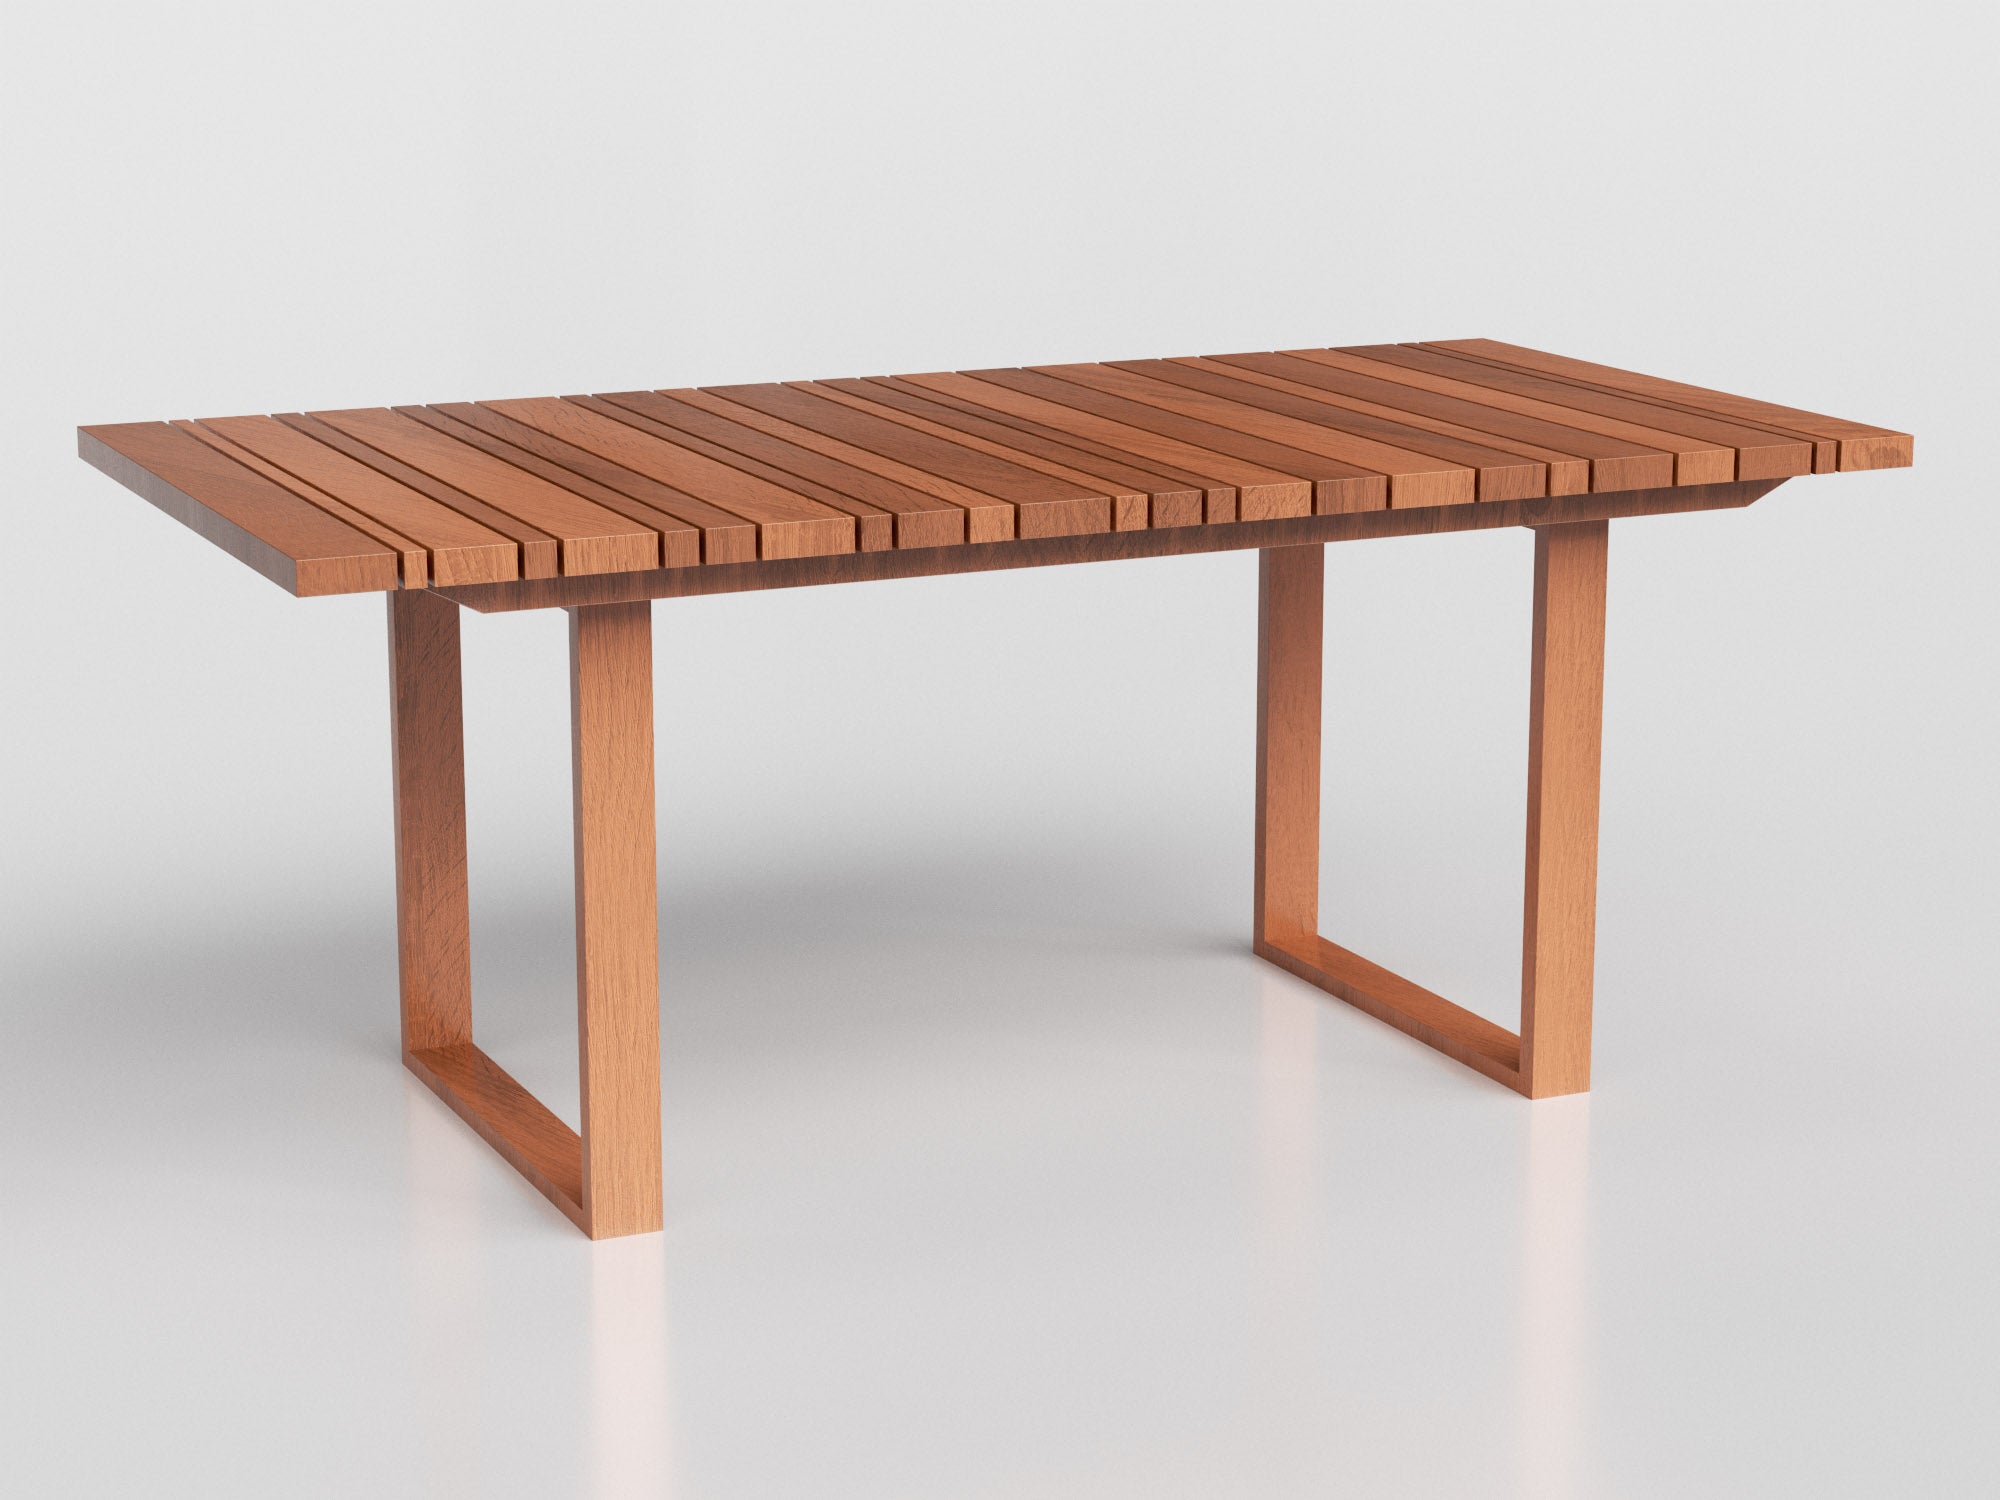 Fusion Dining Table Compact with wood estruture and top, designed by Maria Candida Machado